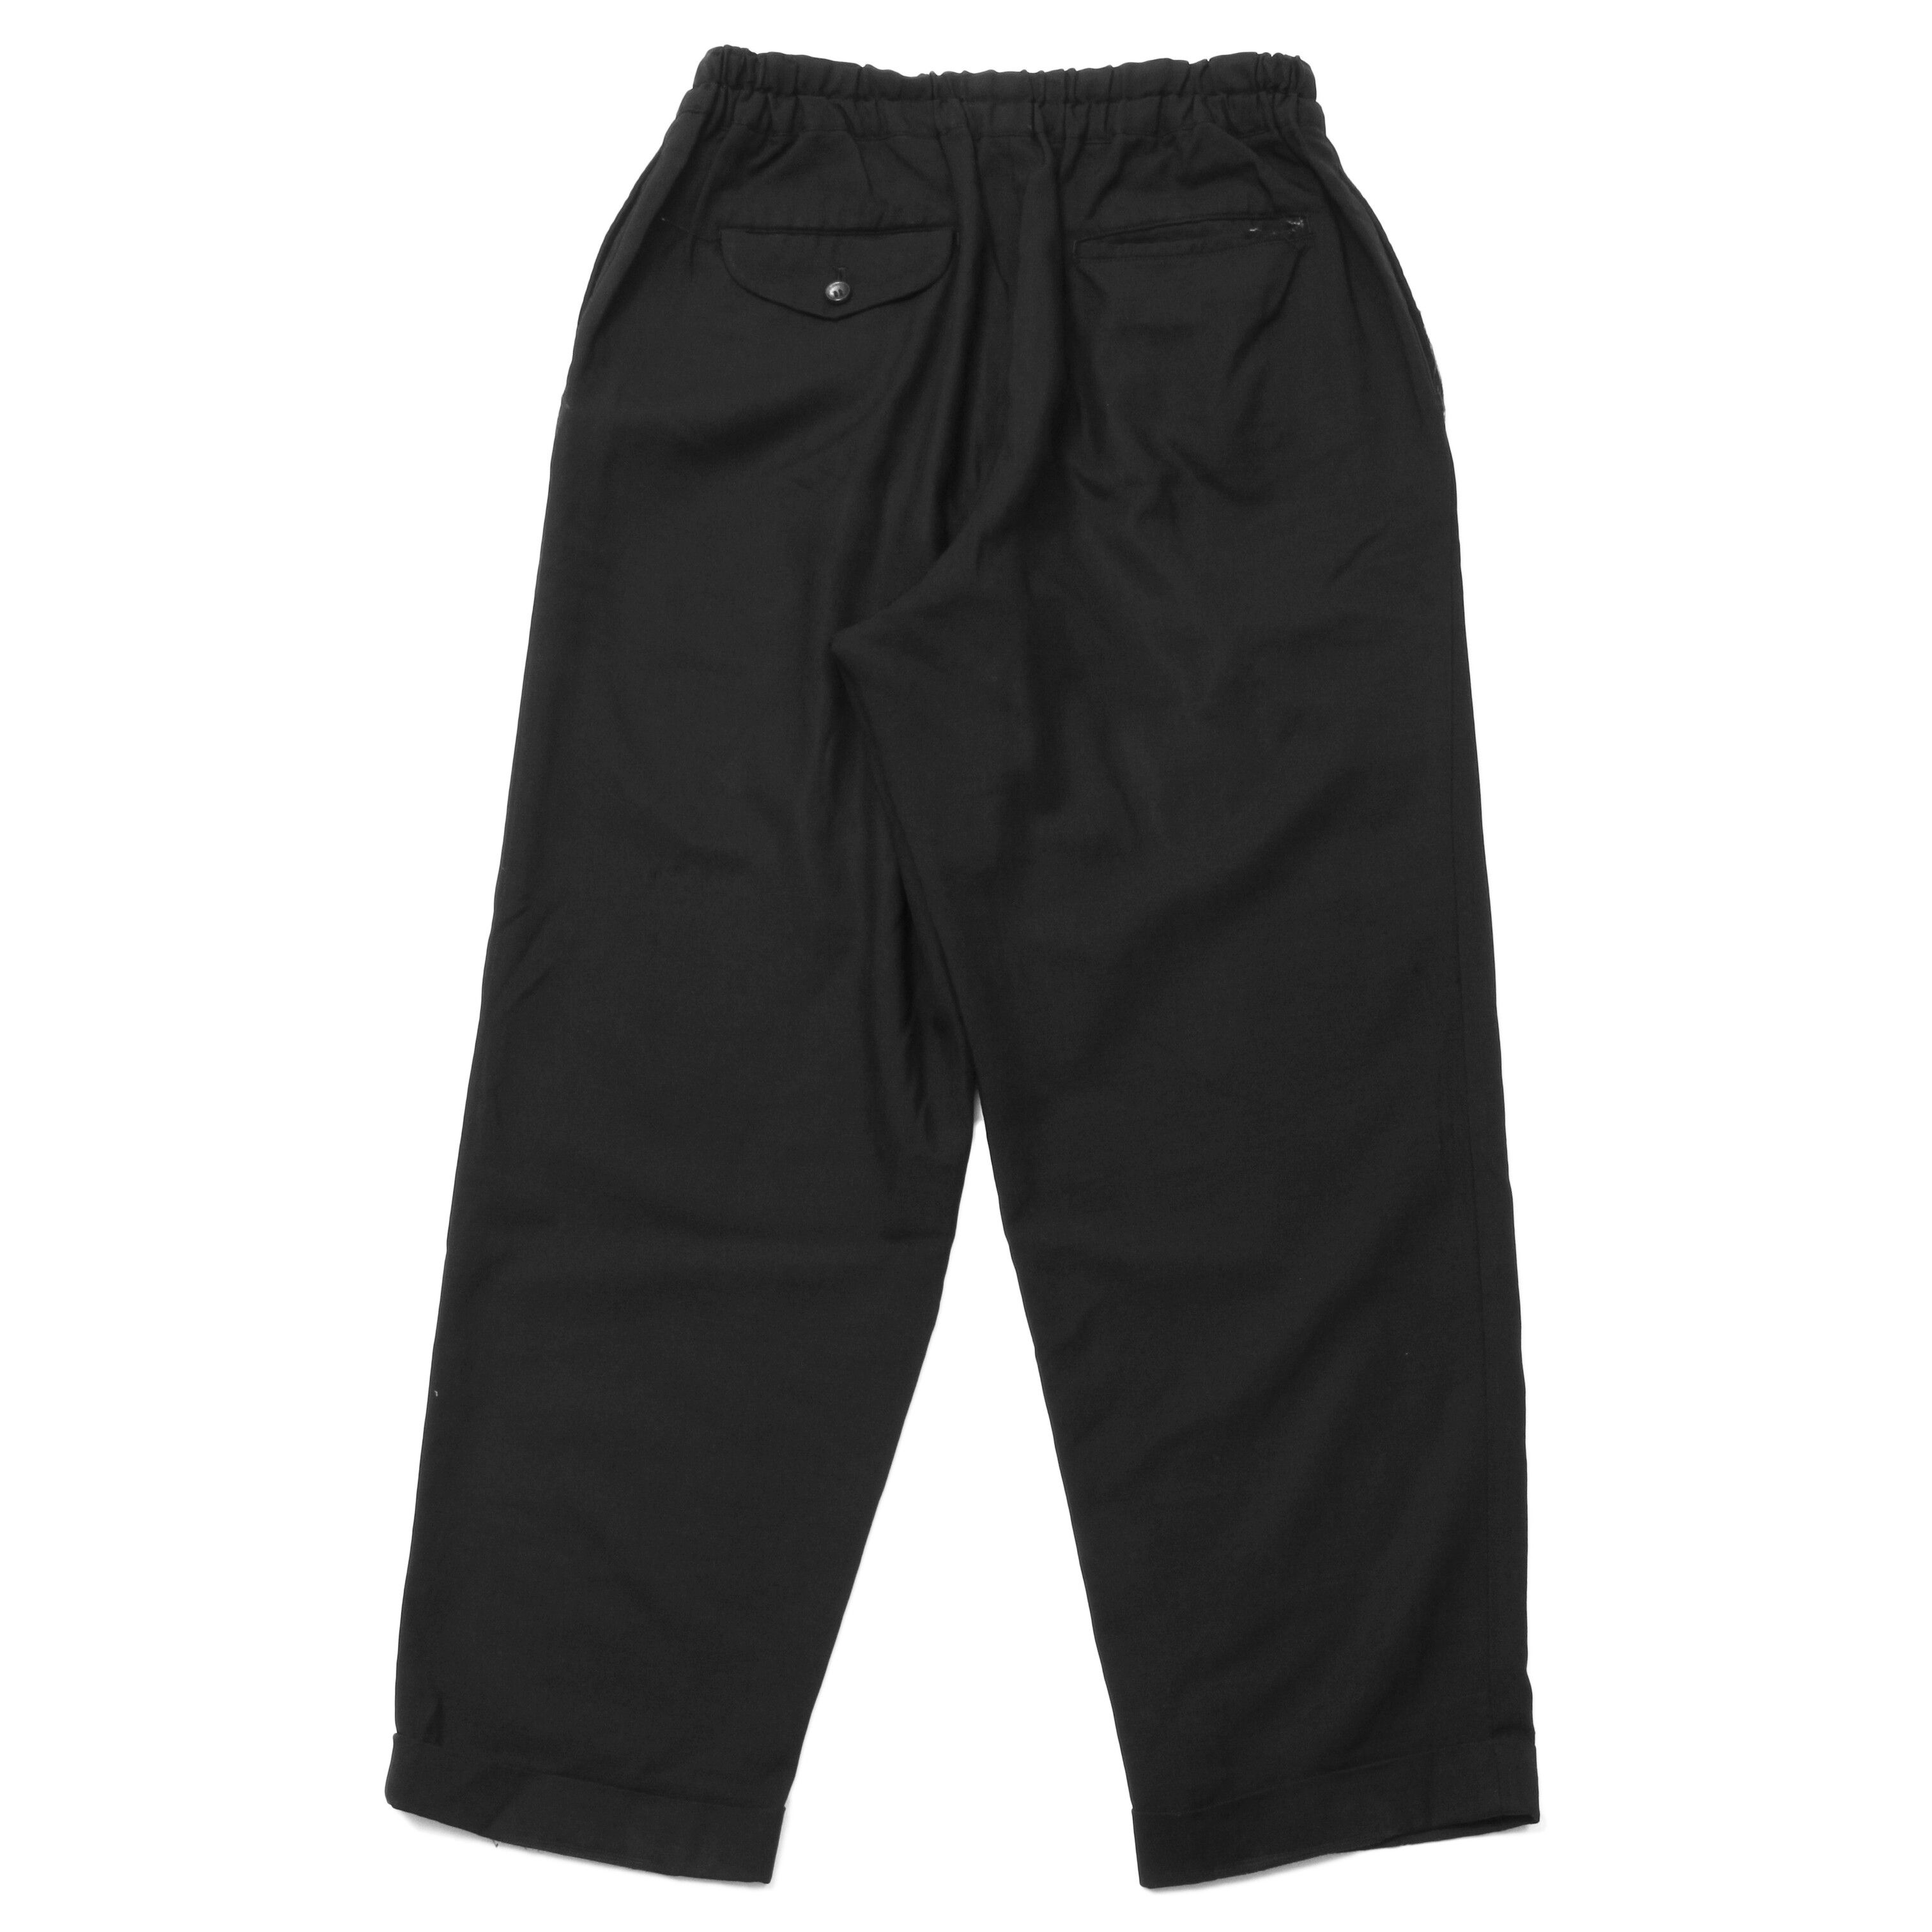 SS98 Patched Wool Pants with Elastic Waistband - 2